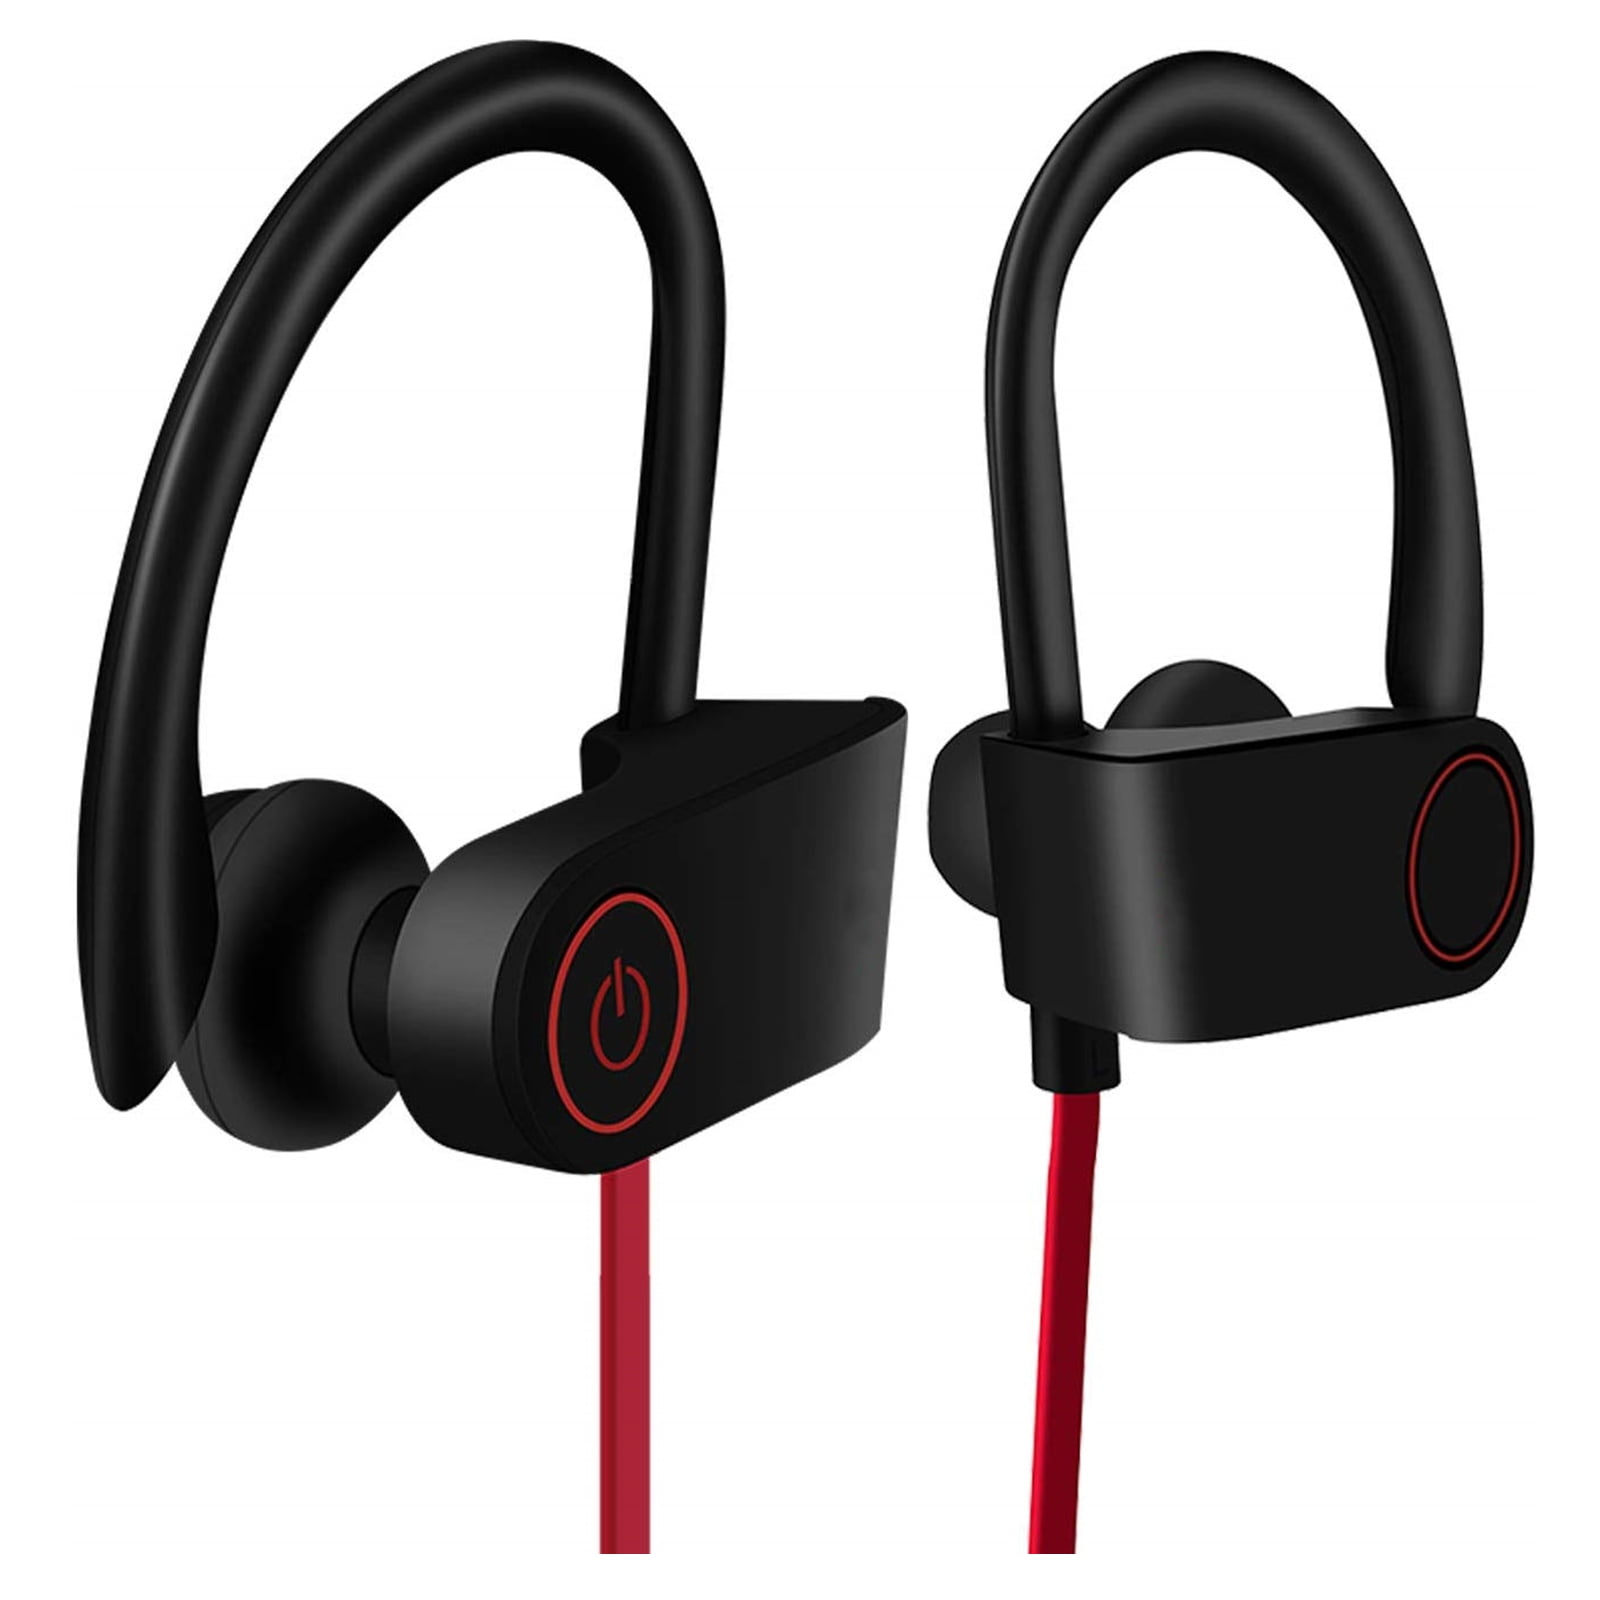 Best In ear earbuds HiFi Stereo with Mic 10 hours playback Gym workout passive Noise Cancel wireless earphones BLACK Bluetooth headphones TRINIDa IPX7 Waterproof Sport Wireless headset for running